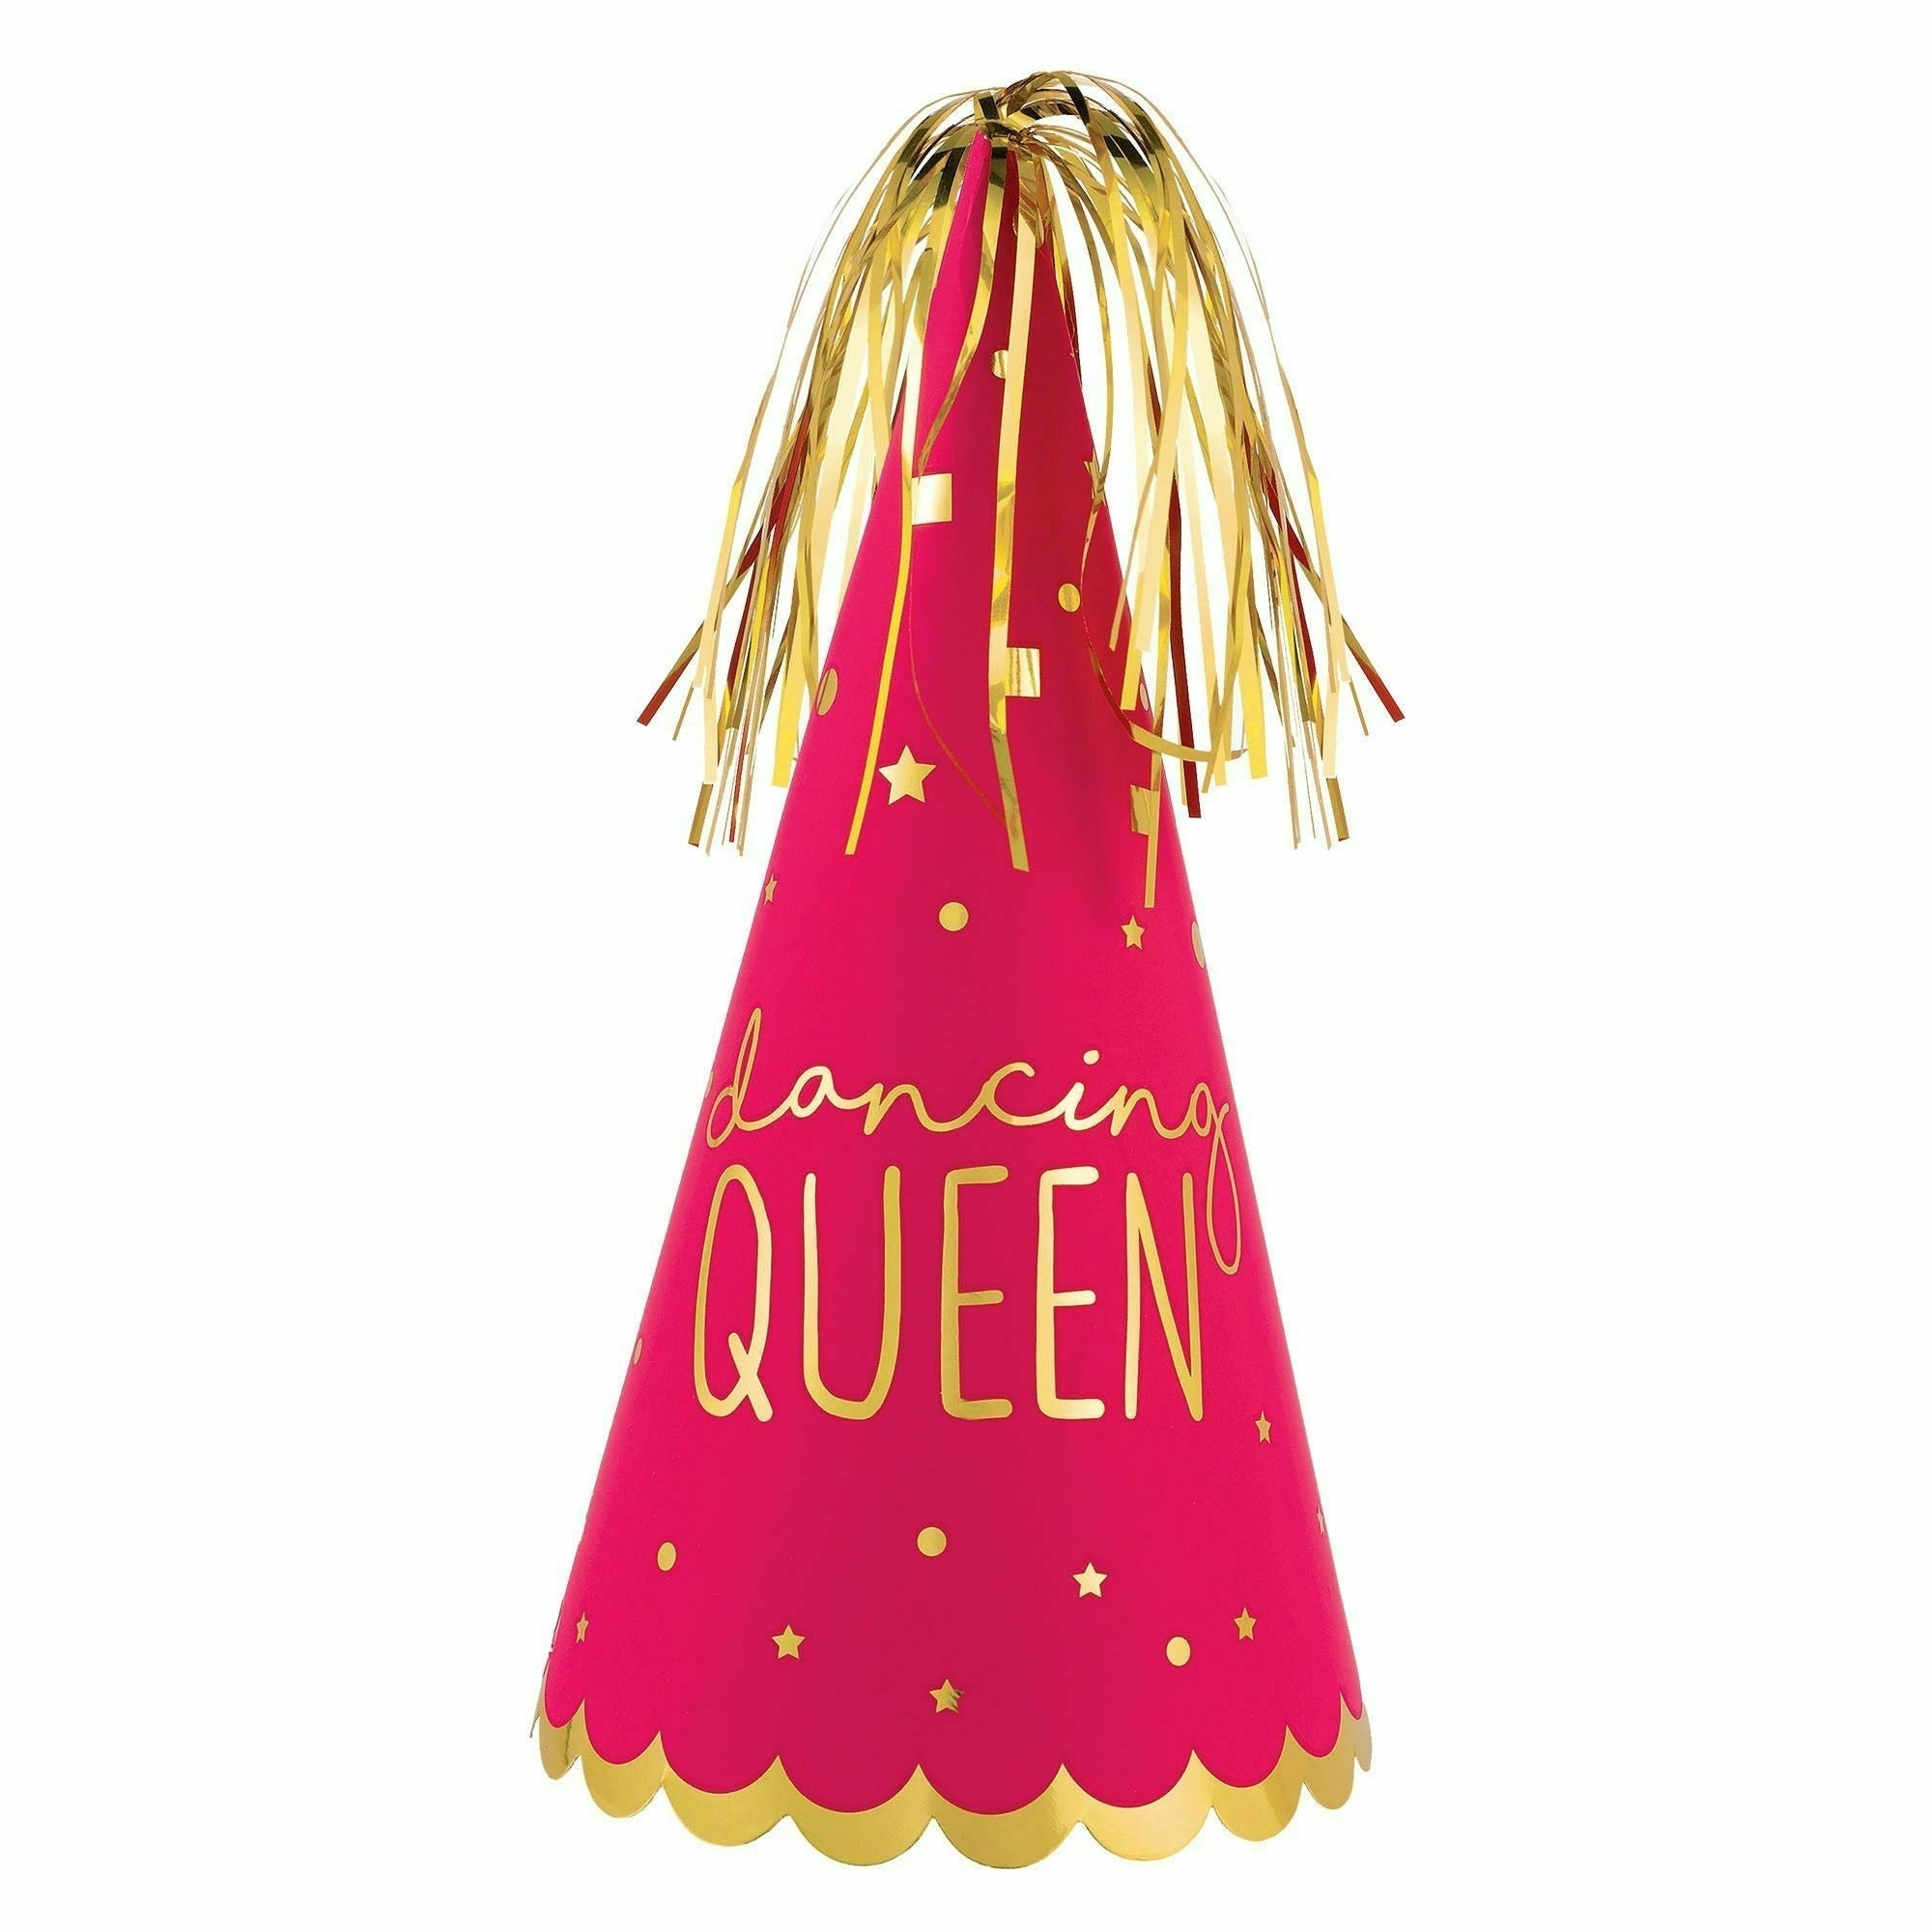 Amscan HOLIDAY: NEW YEAR'S Dancing Queen Cone Hat - Pink